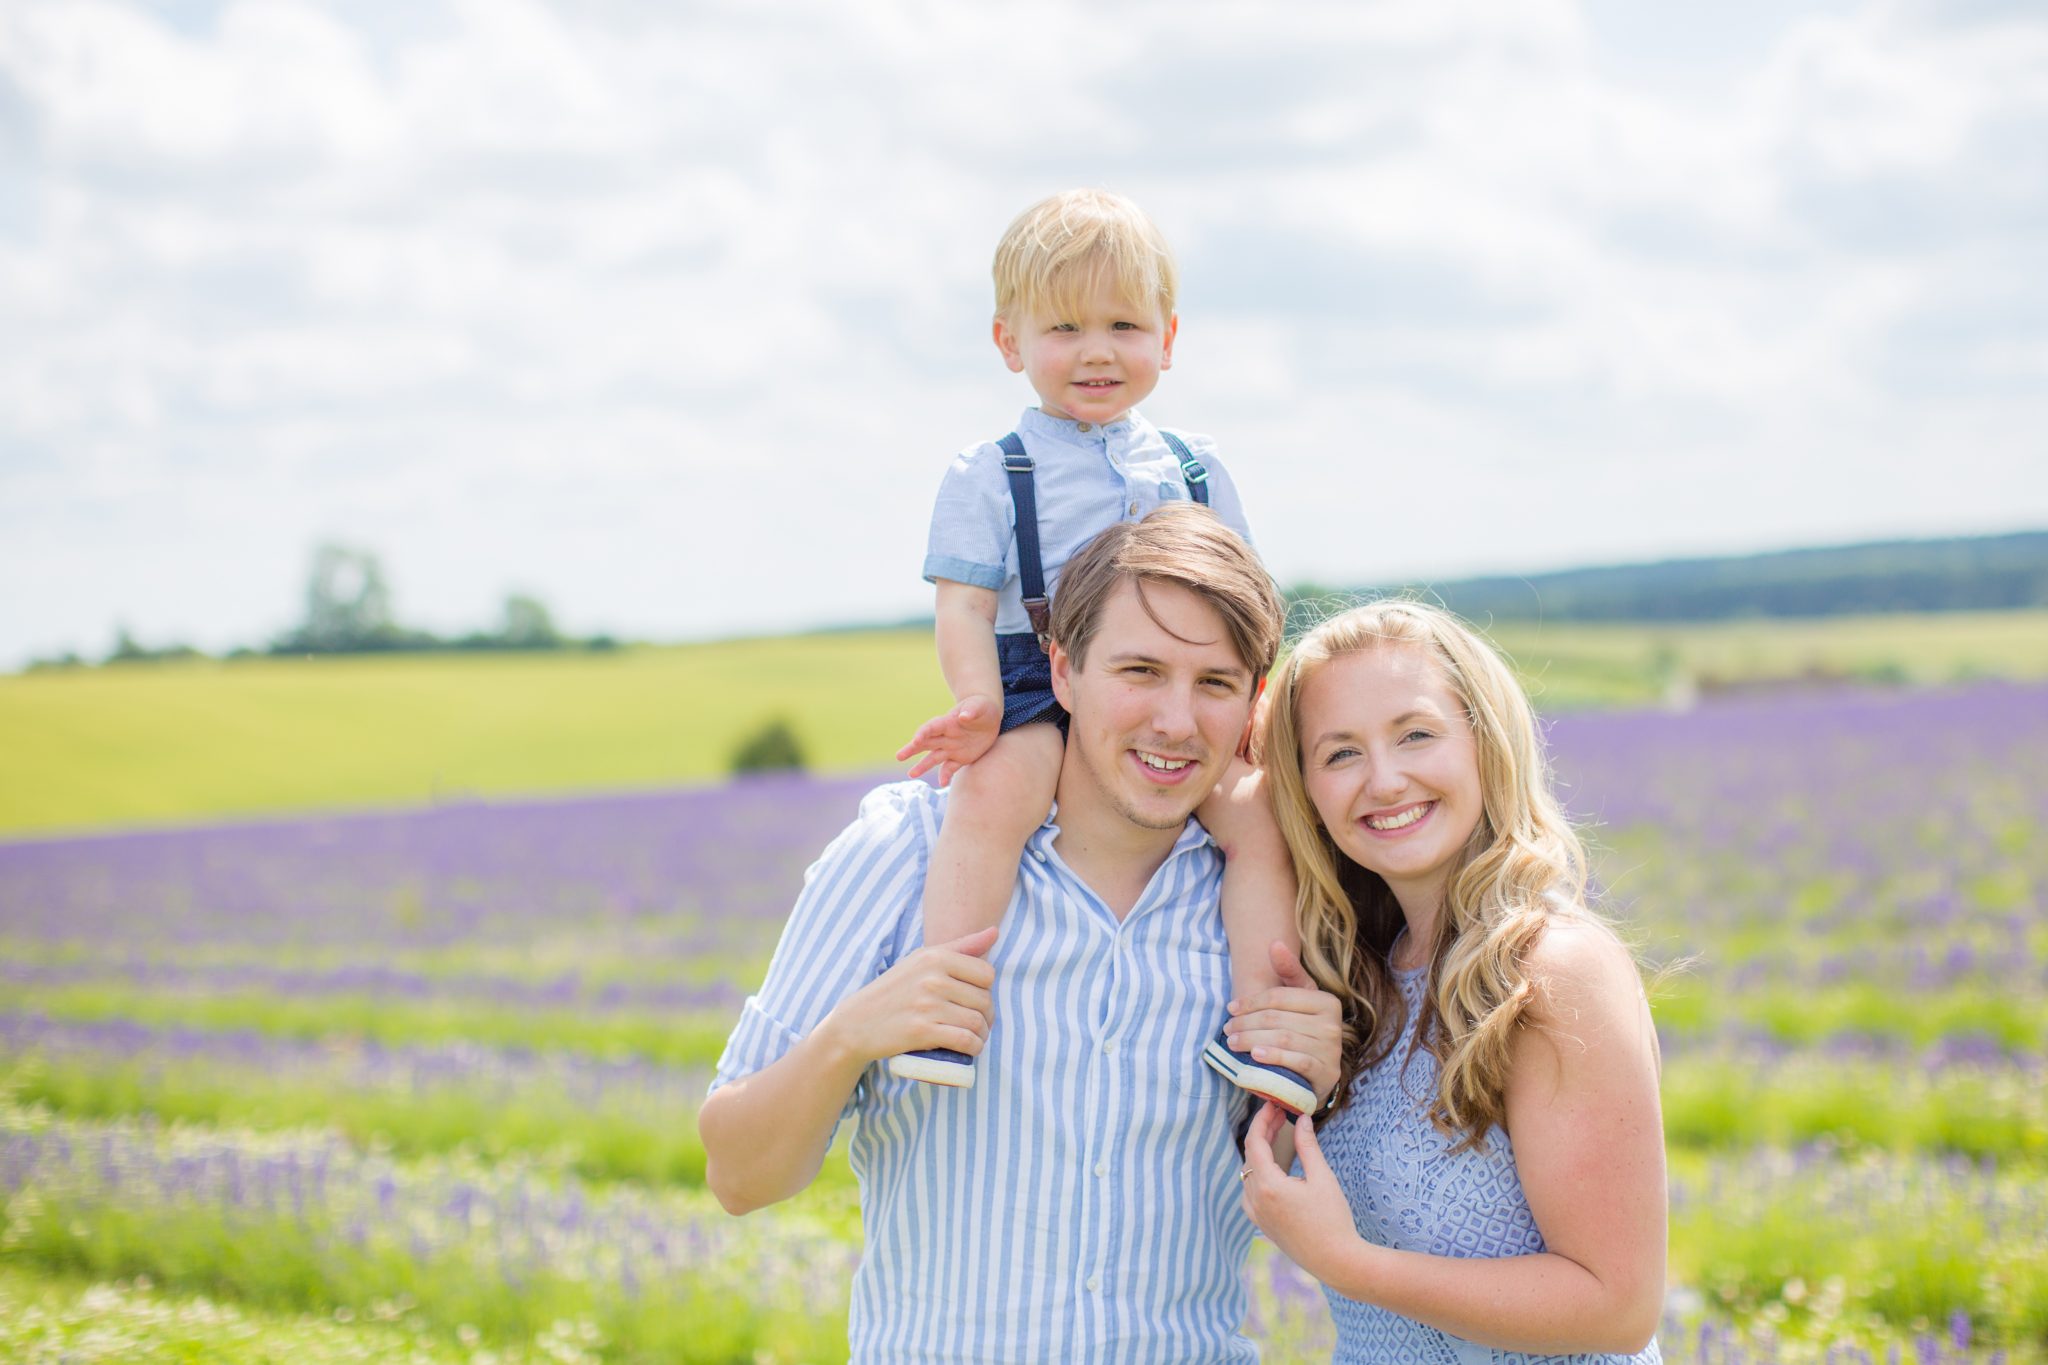 The Lavender Fields Family Shoot day.